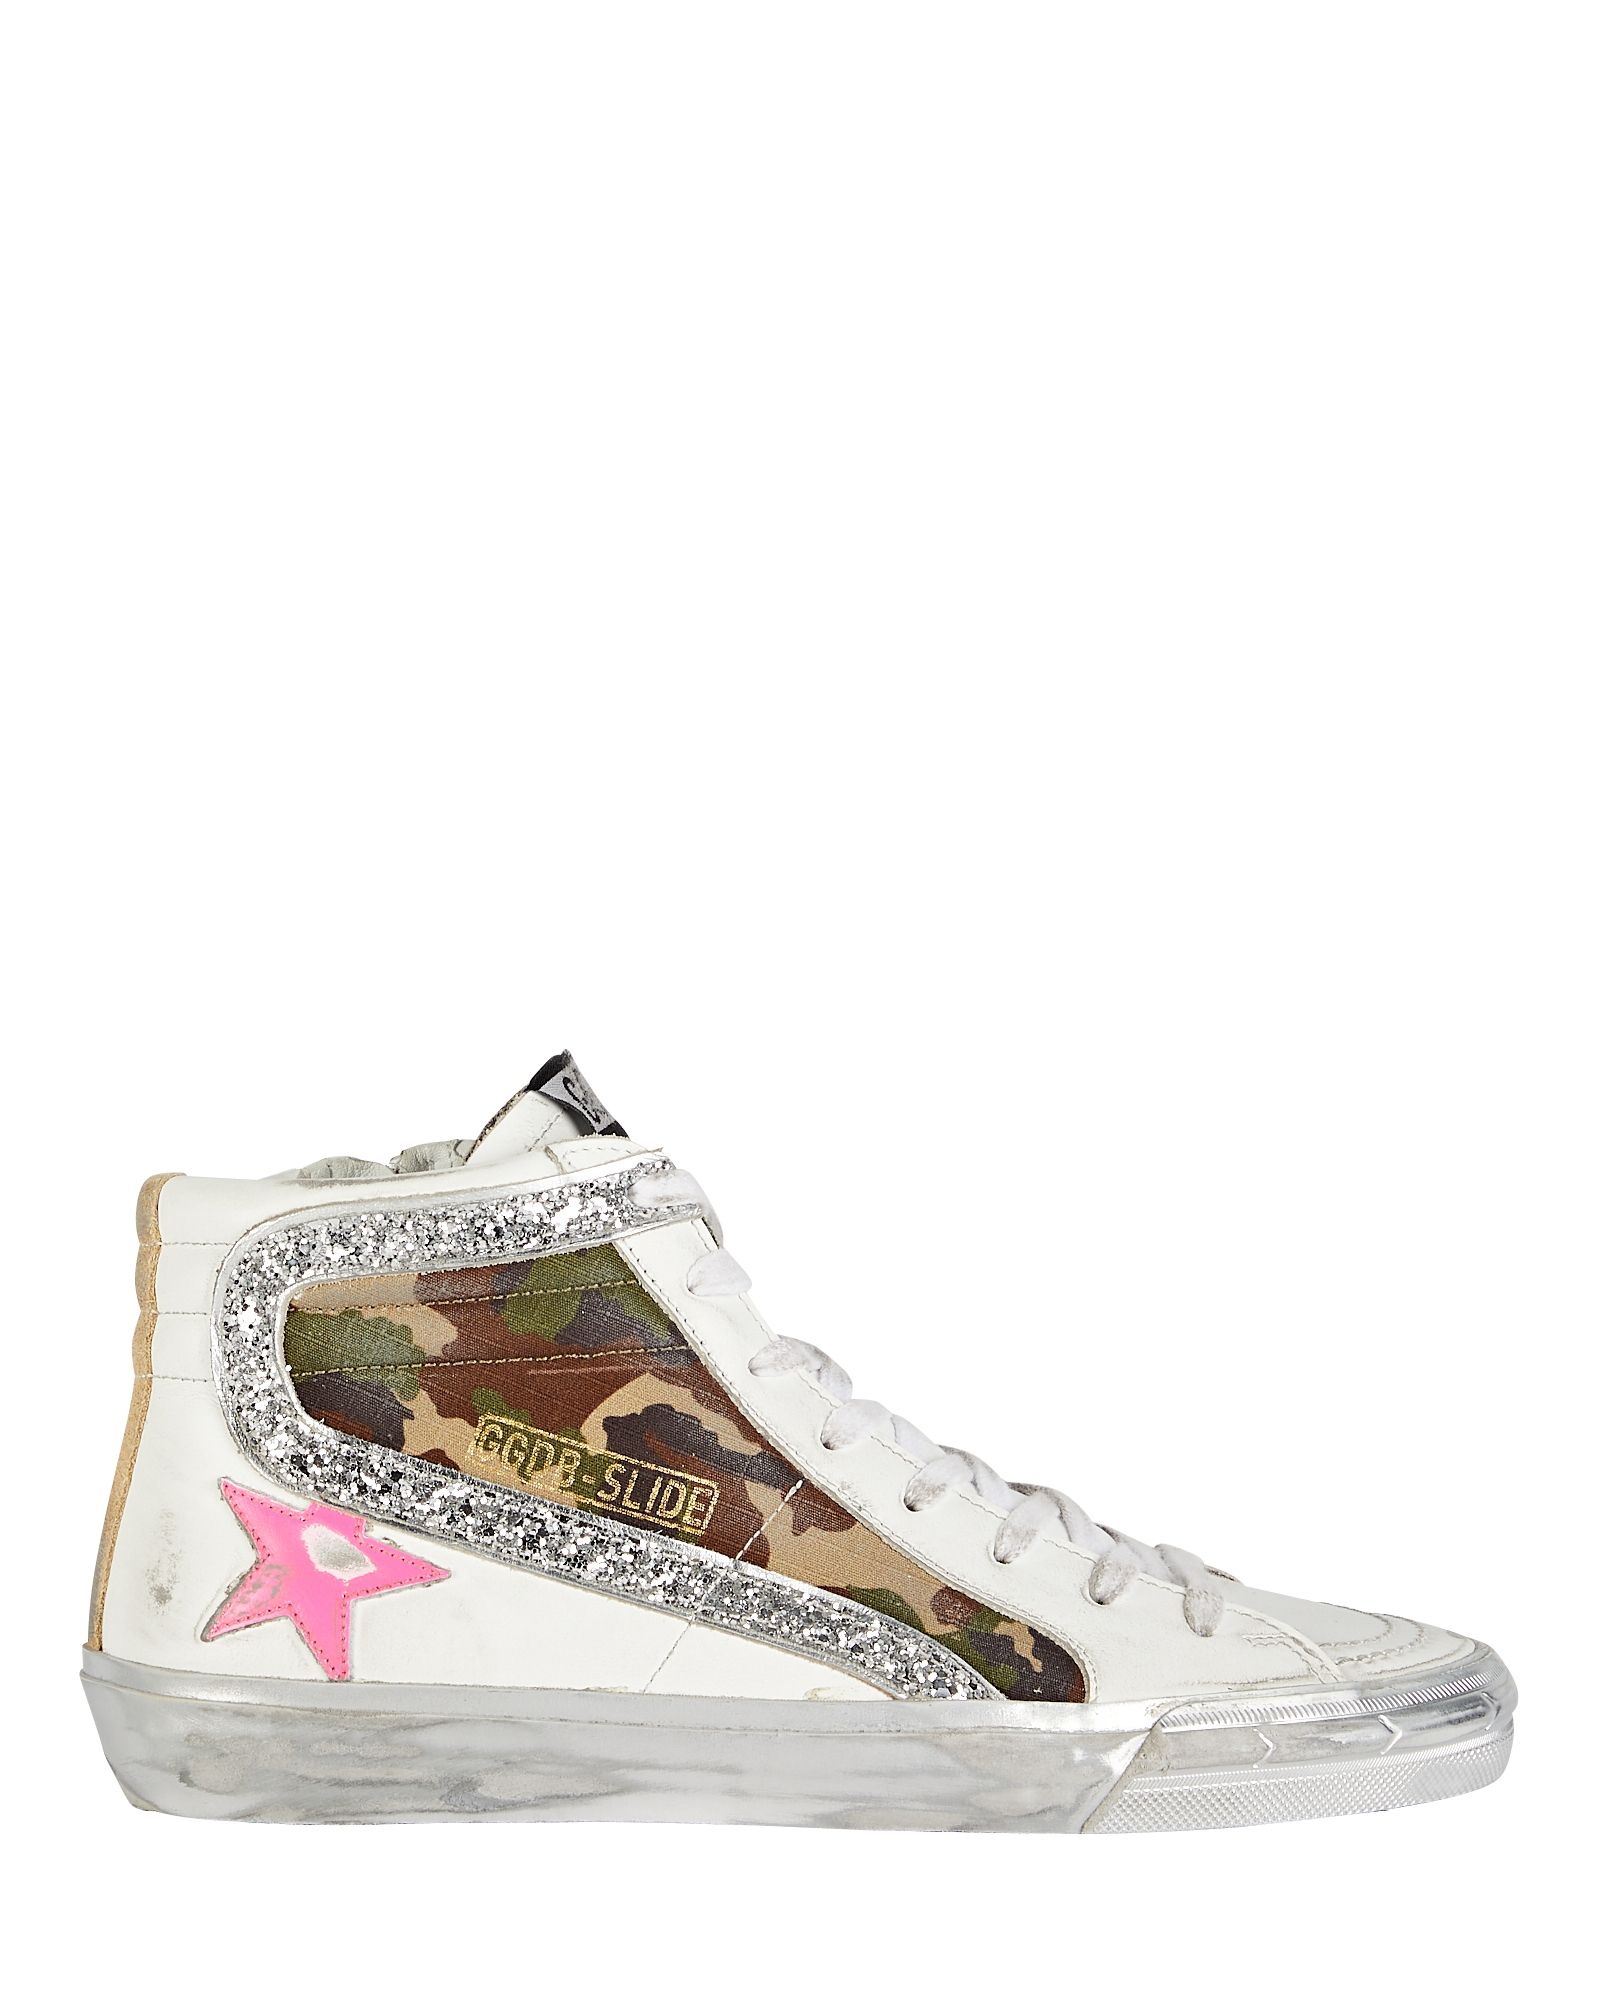 Golden Goose Slide Leather High-Top Sneakers, Multi 41 | INTERMIX